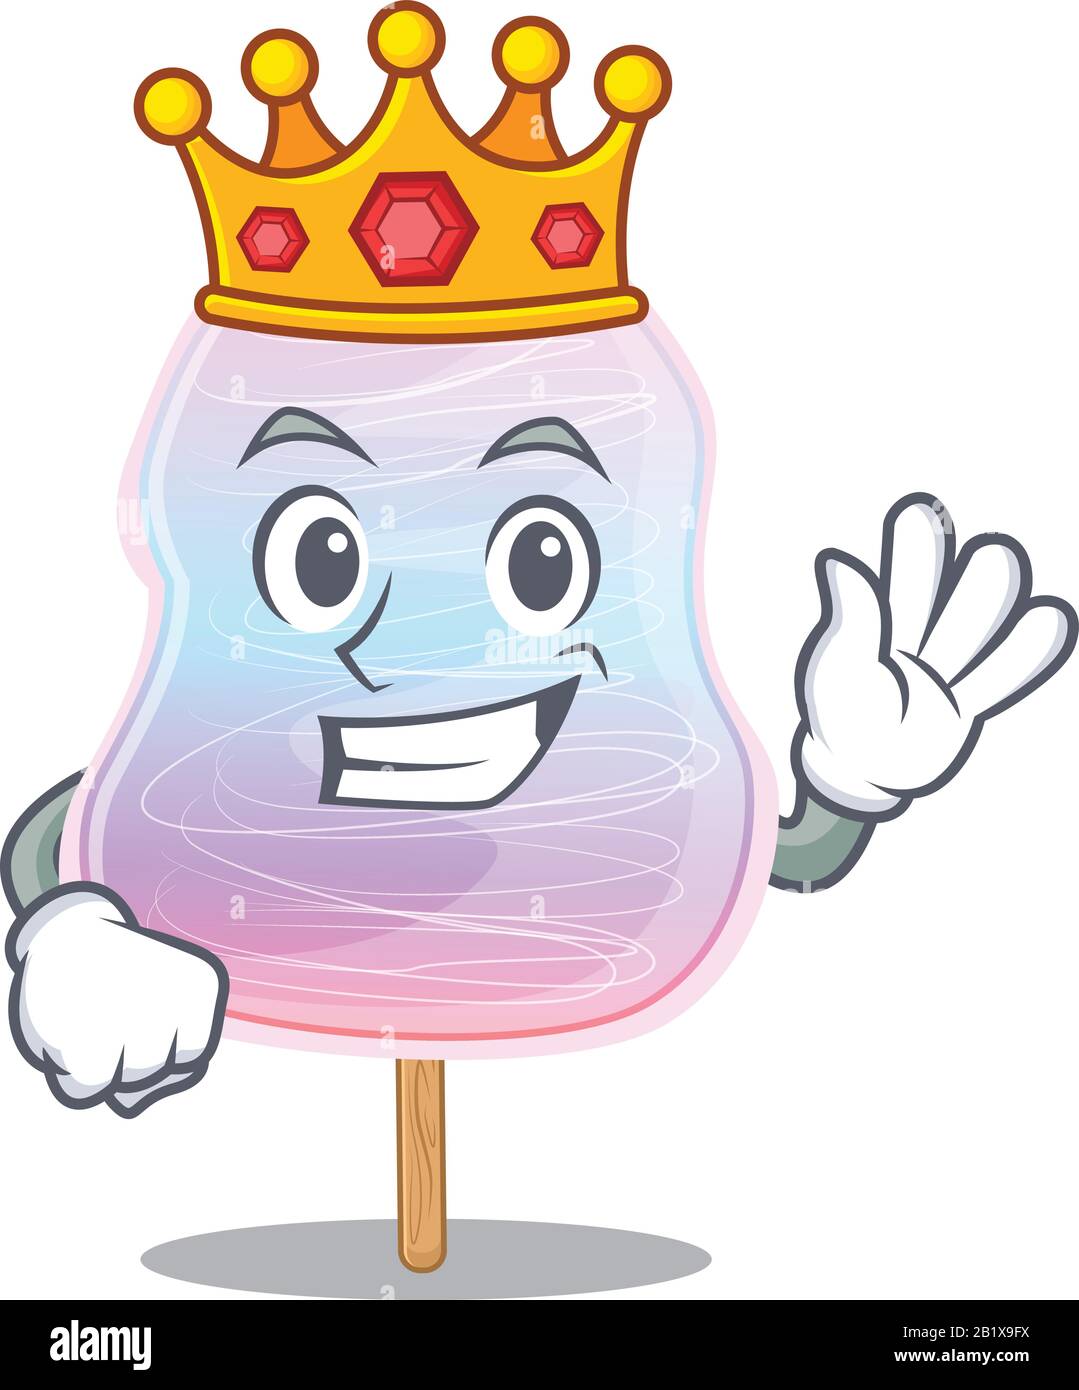 A cartoon mascot design of rainbow cotton candy performed as a King on the stage Stock Vector